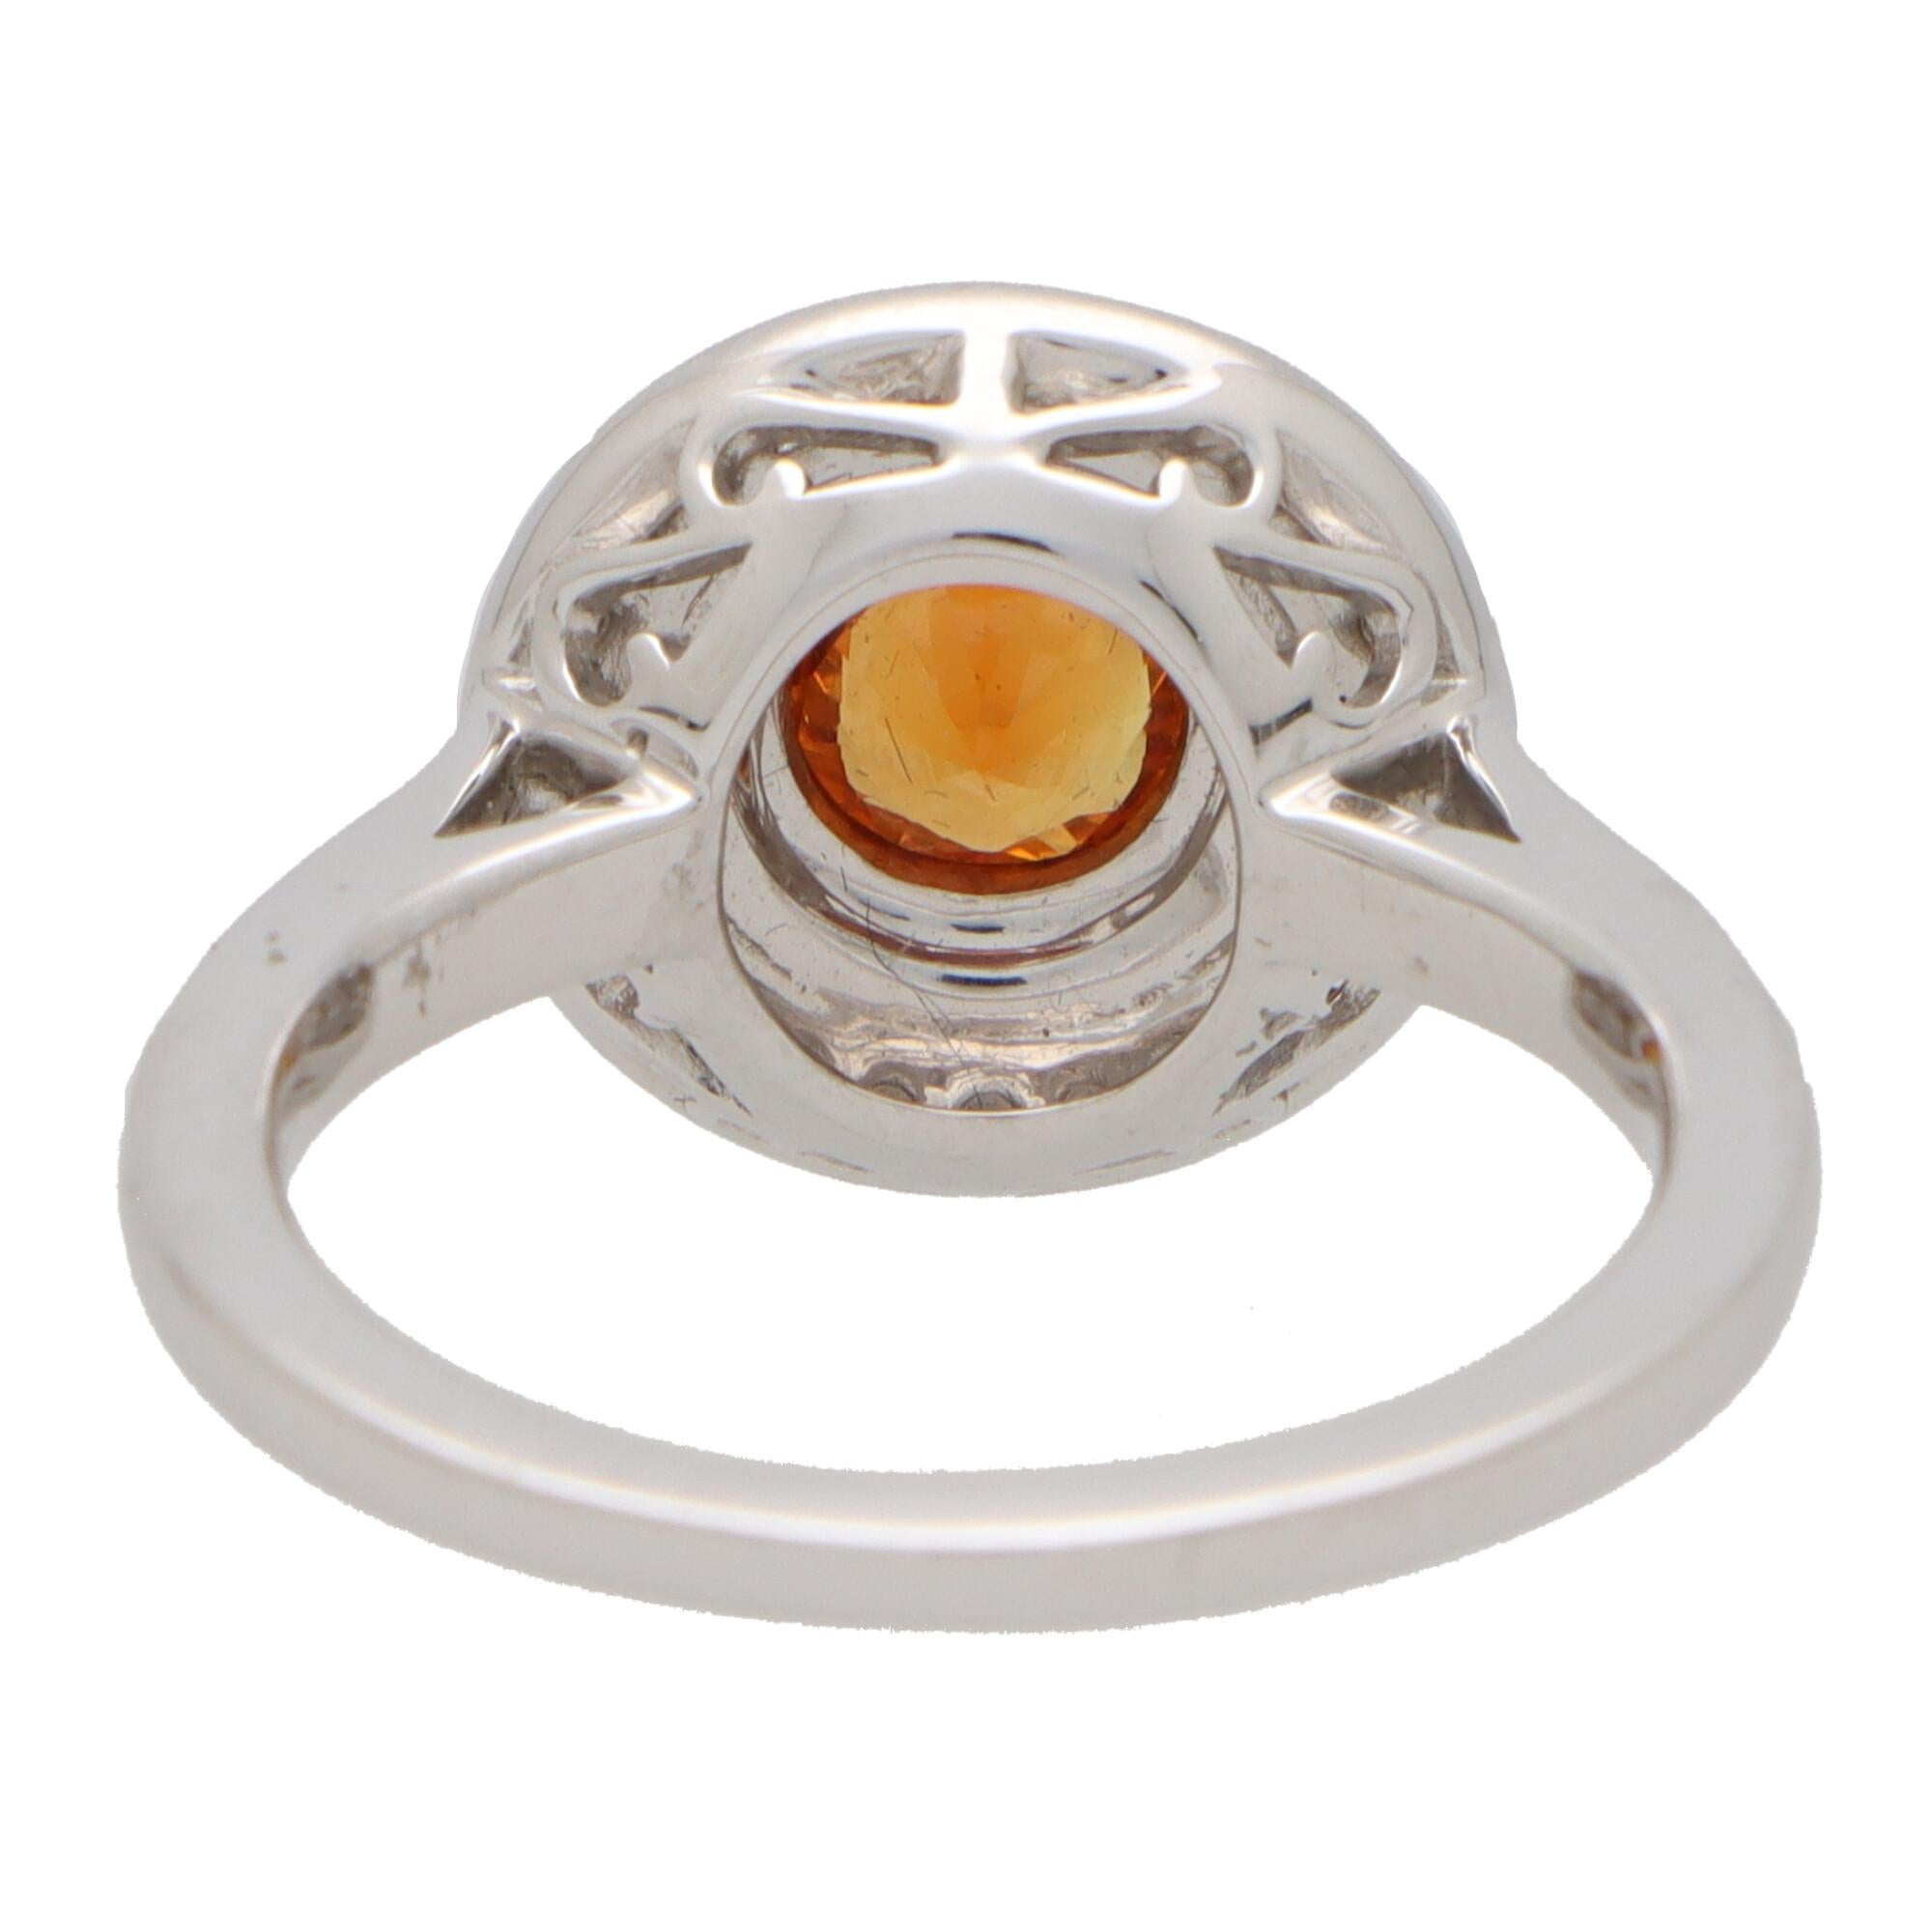 Round Cut Orange Sapphire and Diamond Double Target Ring Set in 18k White Gold